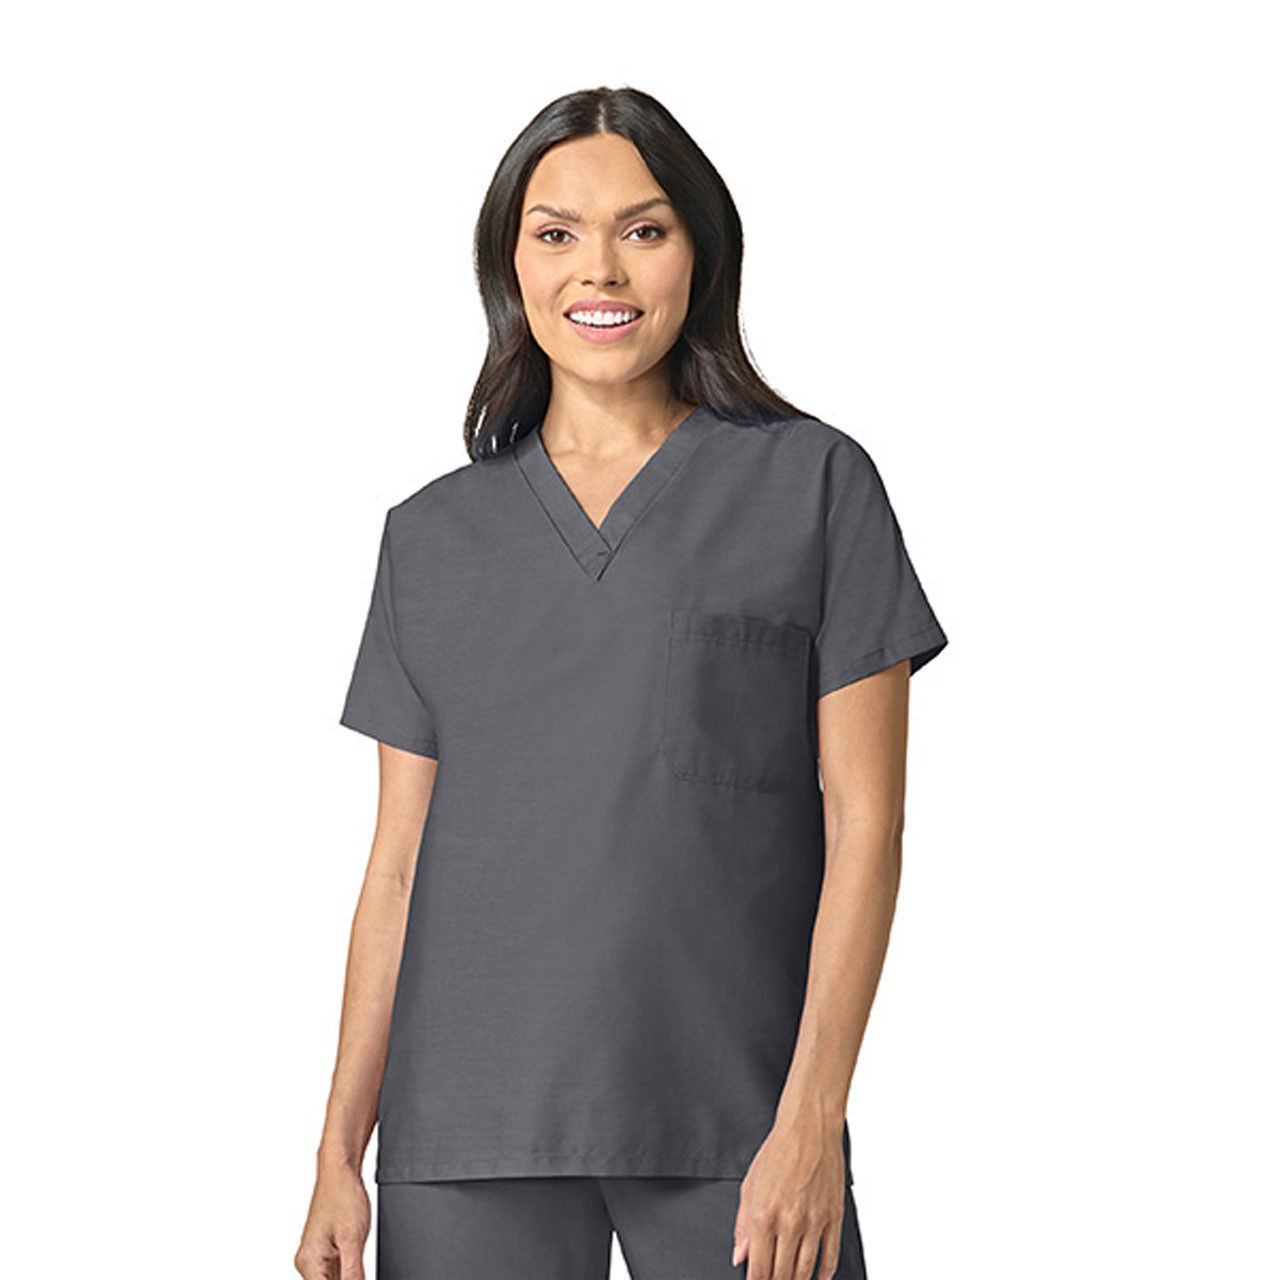 What is the design of the Pewter Gray Scrub Top?